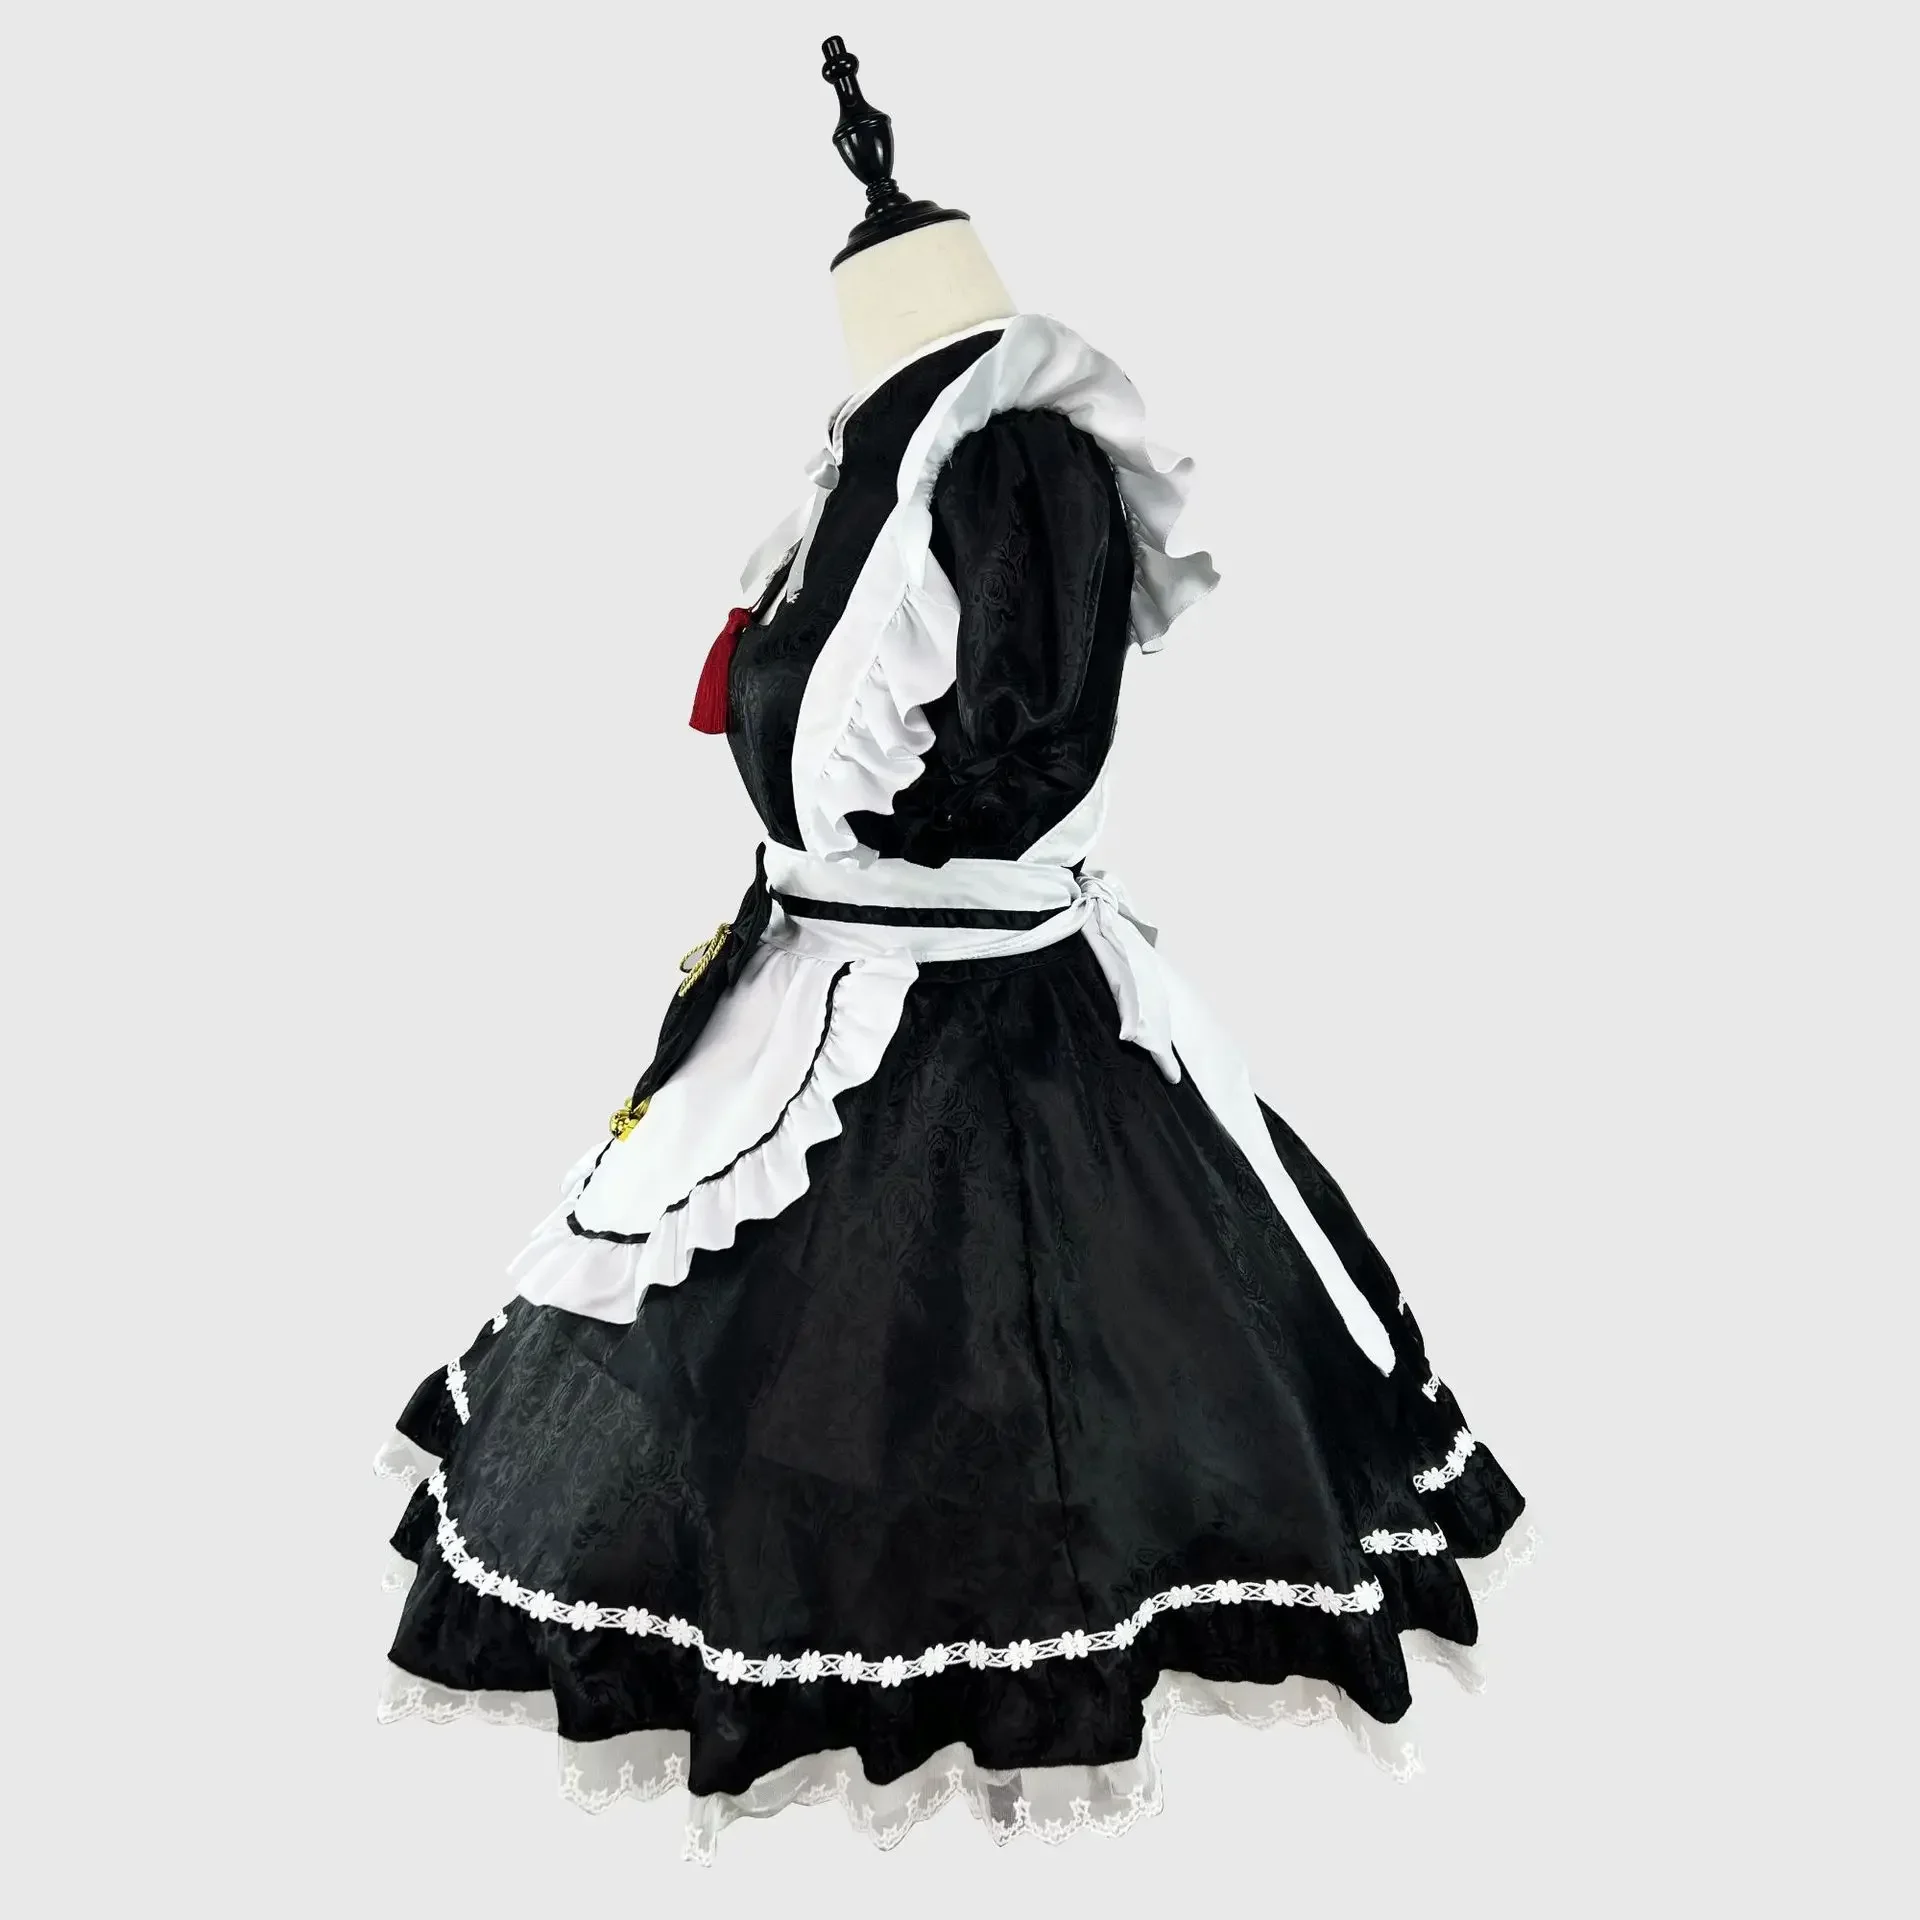 Chinese Style Maid Lolita Cosplay Costume S-5XL Women Cheongsam Dress Halloween Party Waitress Role Play Animation Show Dropship